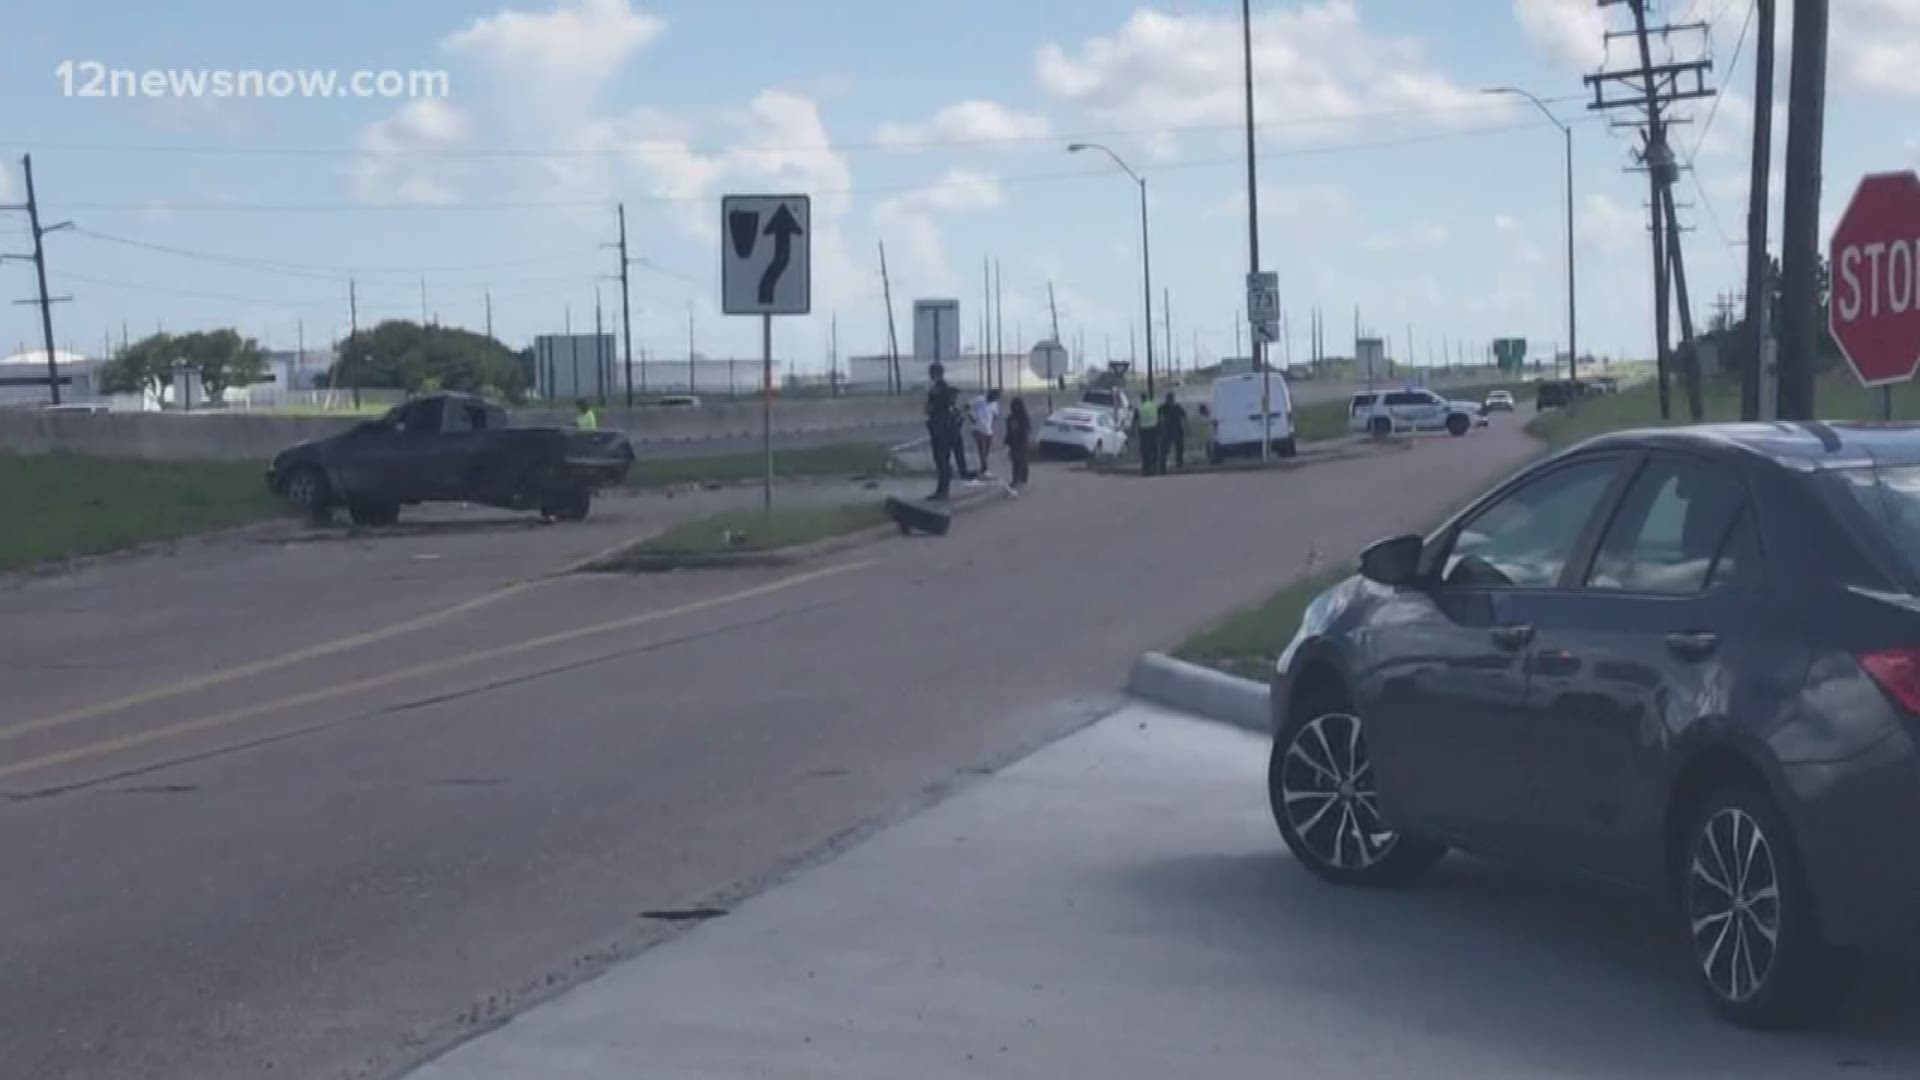 Major accident on HWY 73 in Port Arthur on Friday